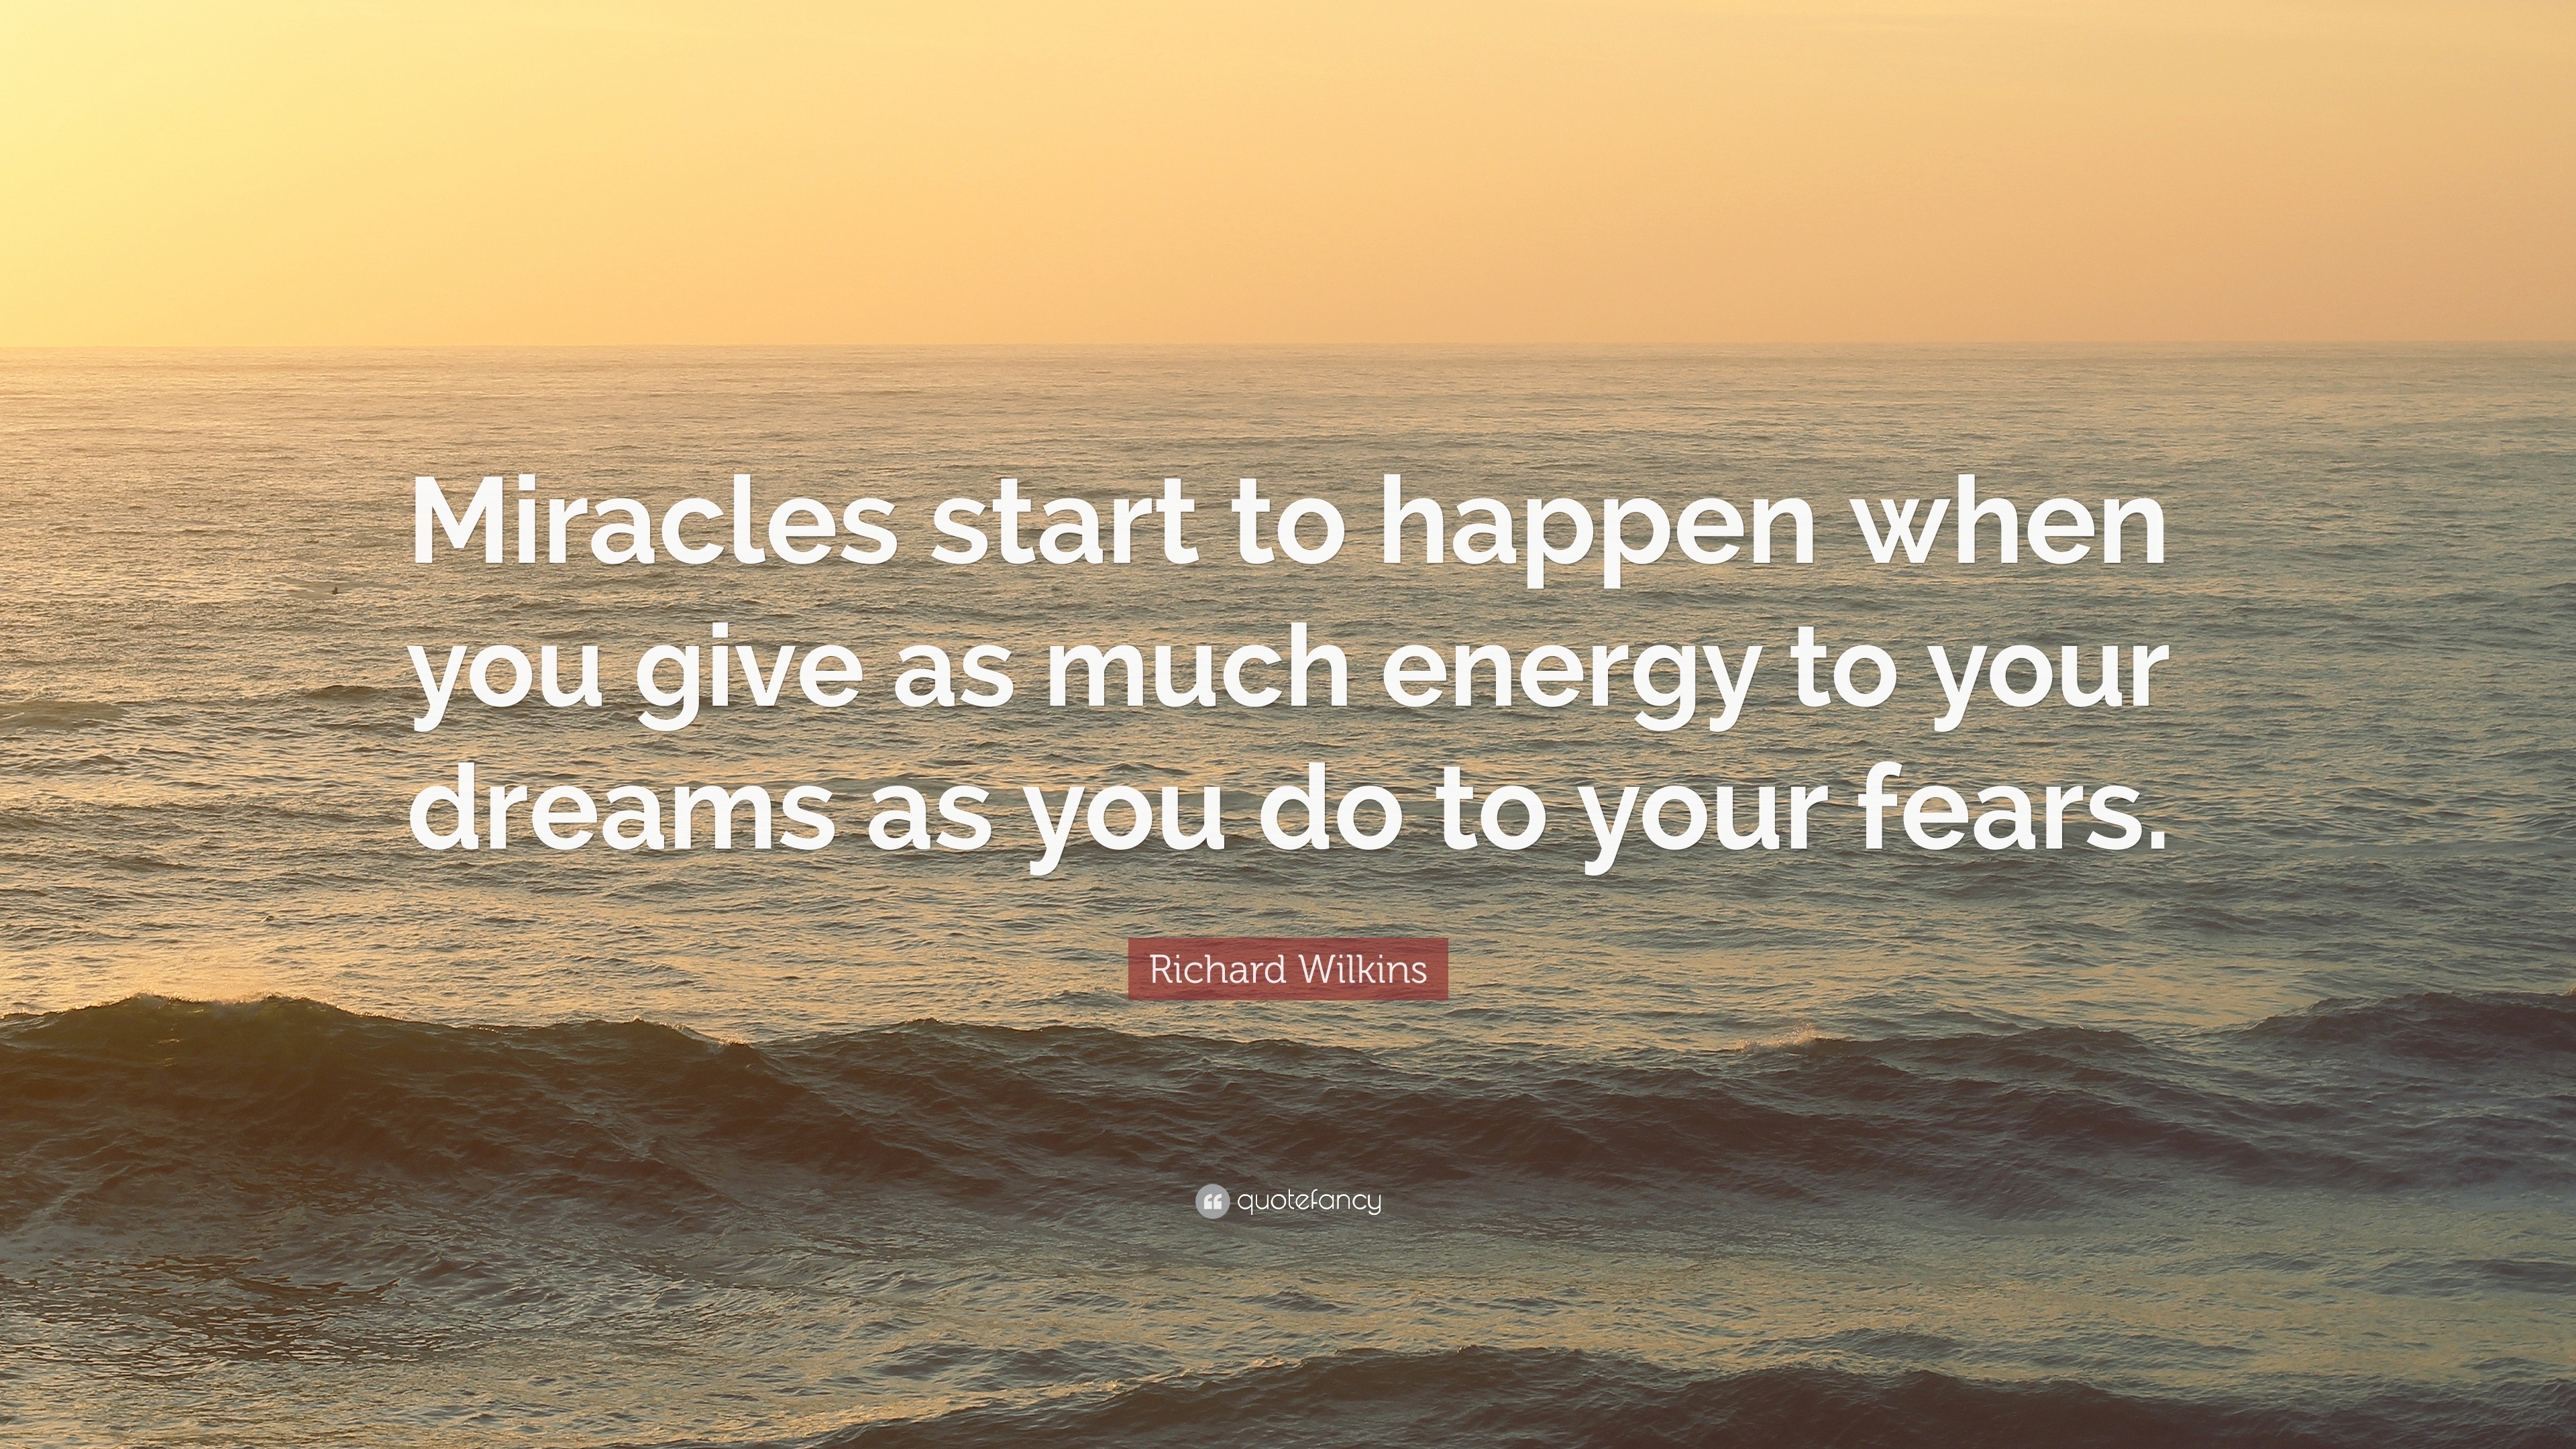 Richard Wilkins Quote: “Miracles start to happen when you give as much